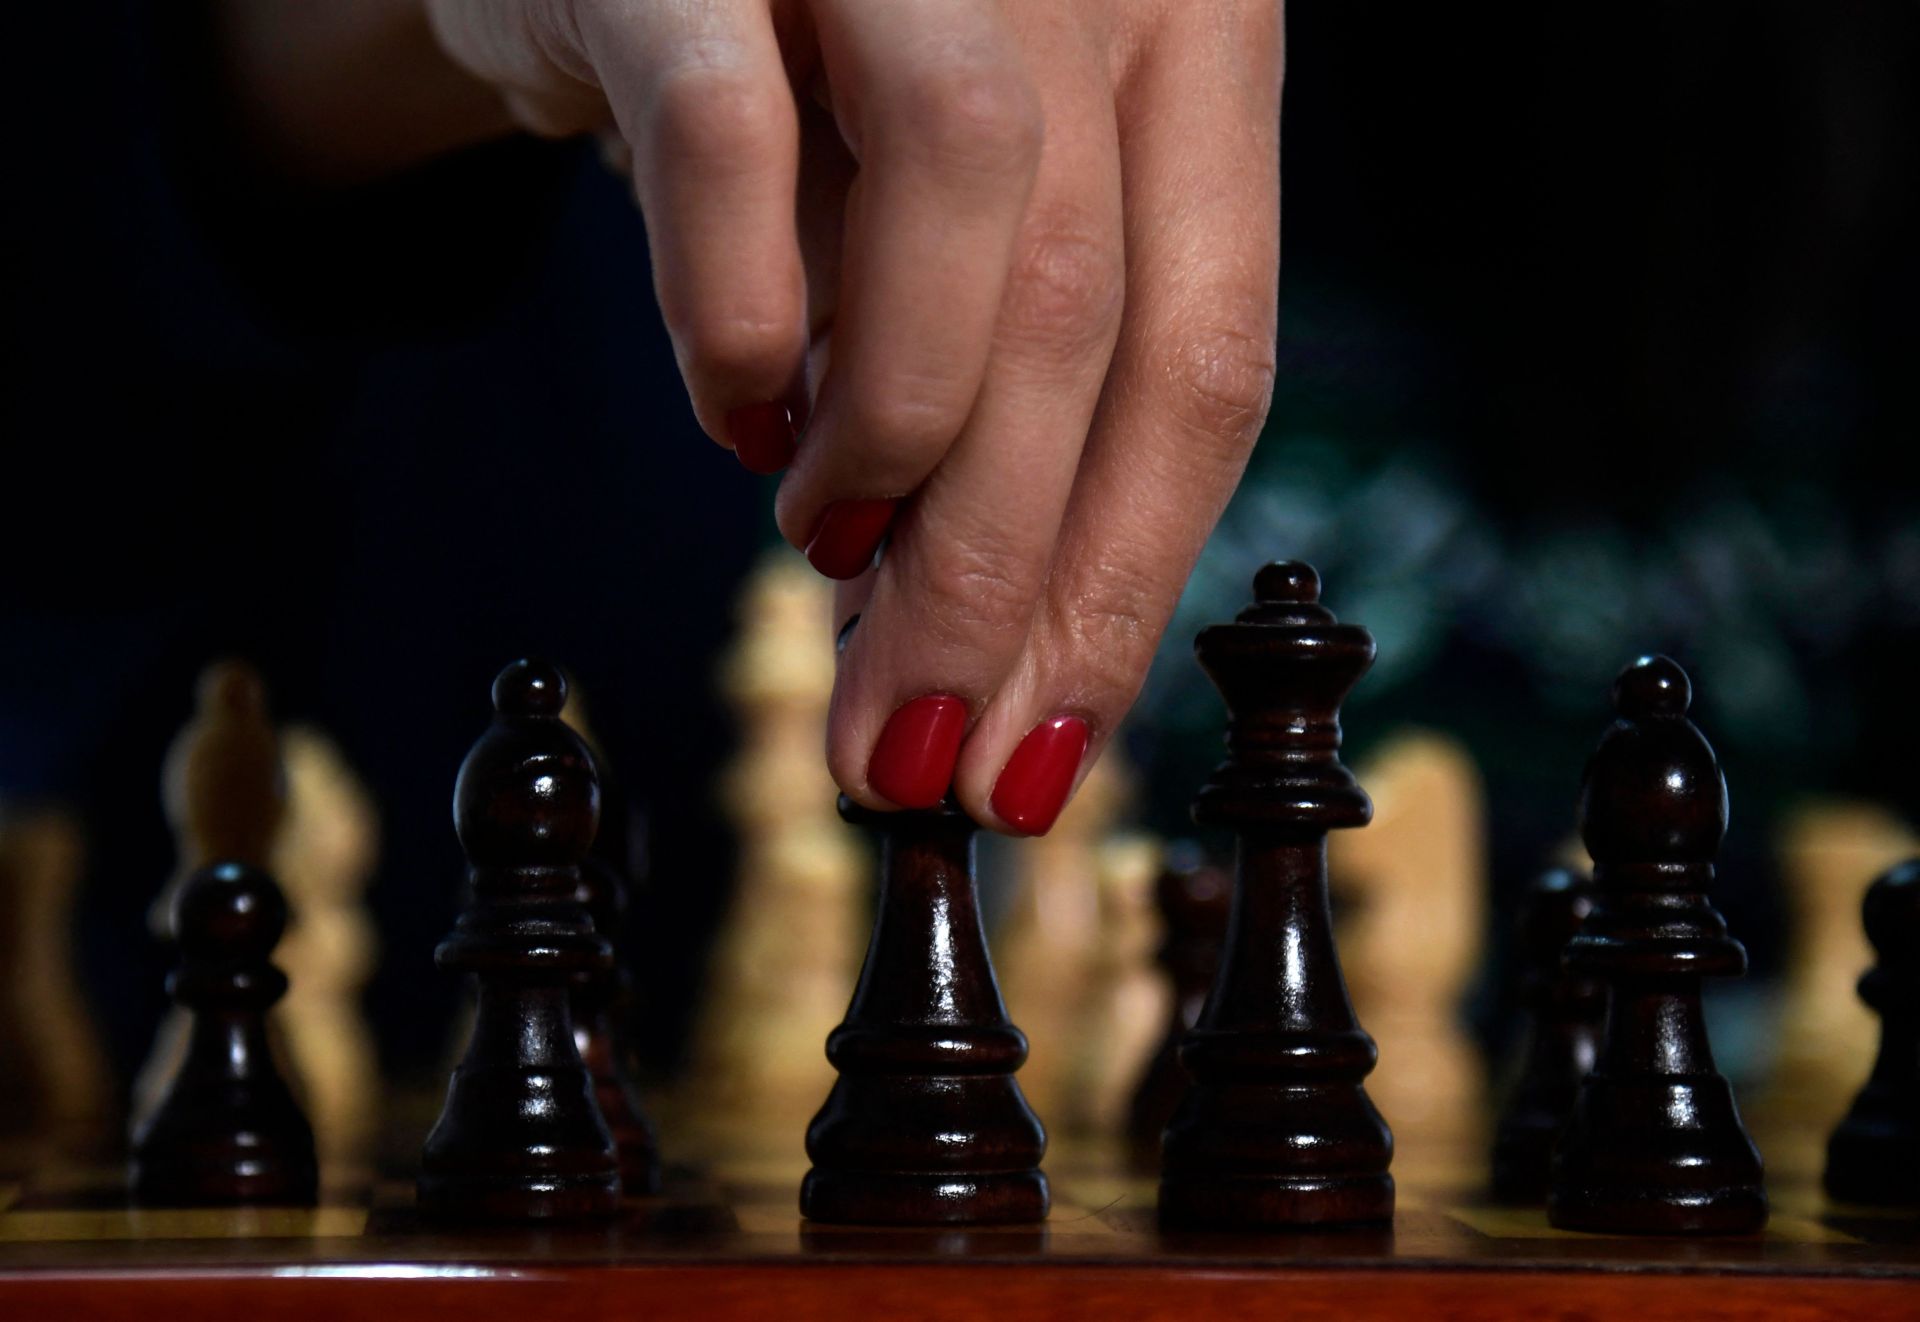 Women in Chess Speak Up on Sexual Harassment